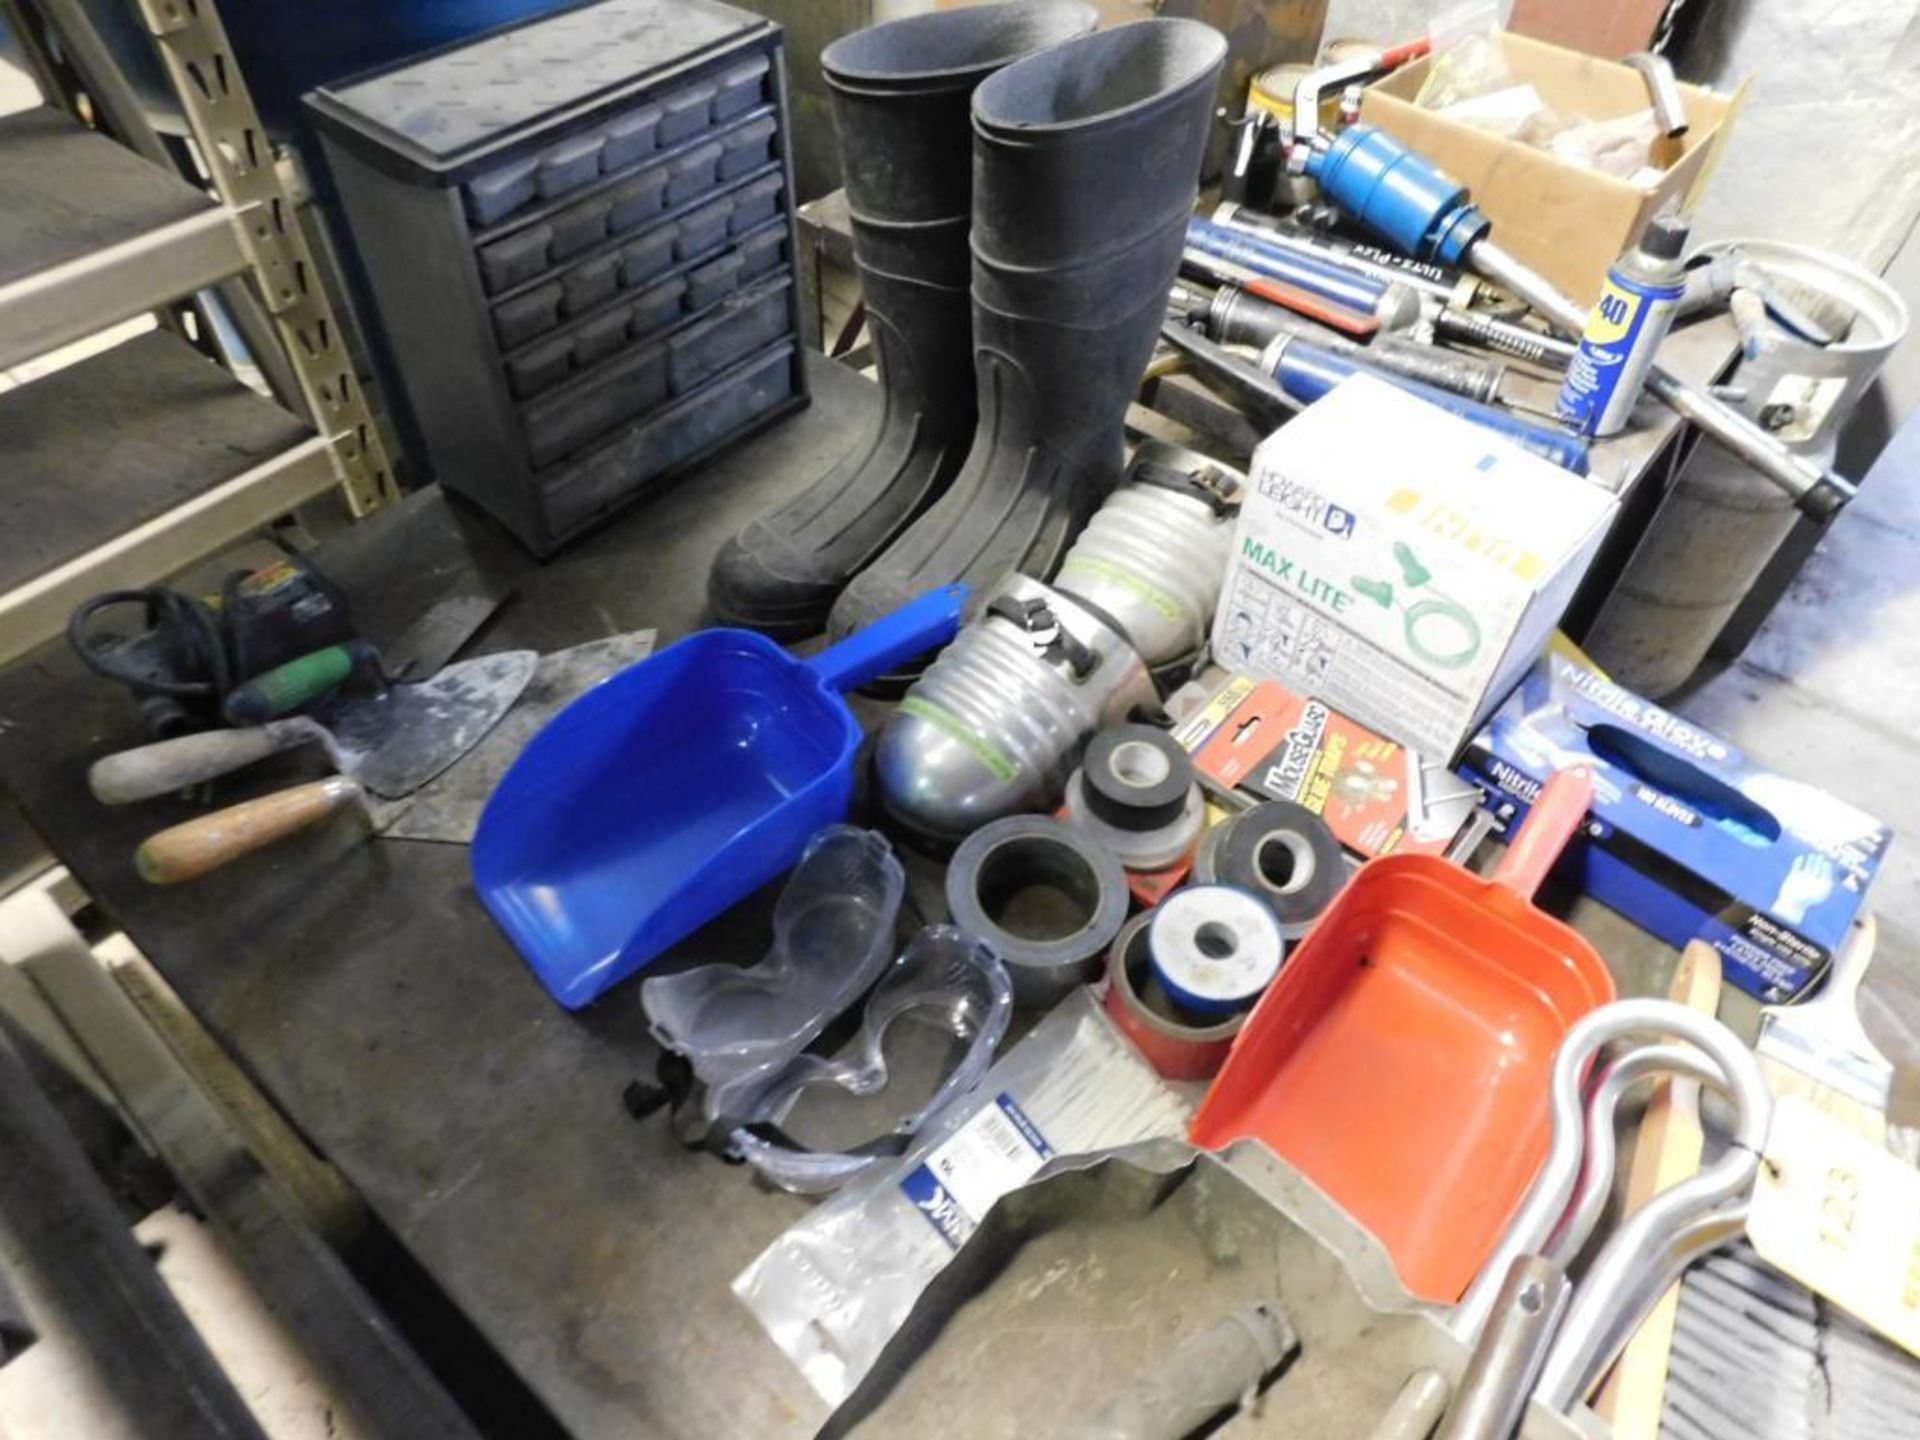 LOT: Contents of Cart including Assorted Tapes, Boots, Tarps, Goggles, Gloves, Pump, Dust Pans, Brus - Image 2 of 3